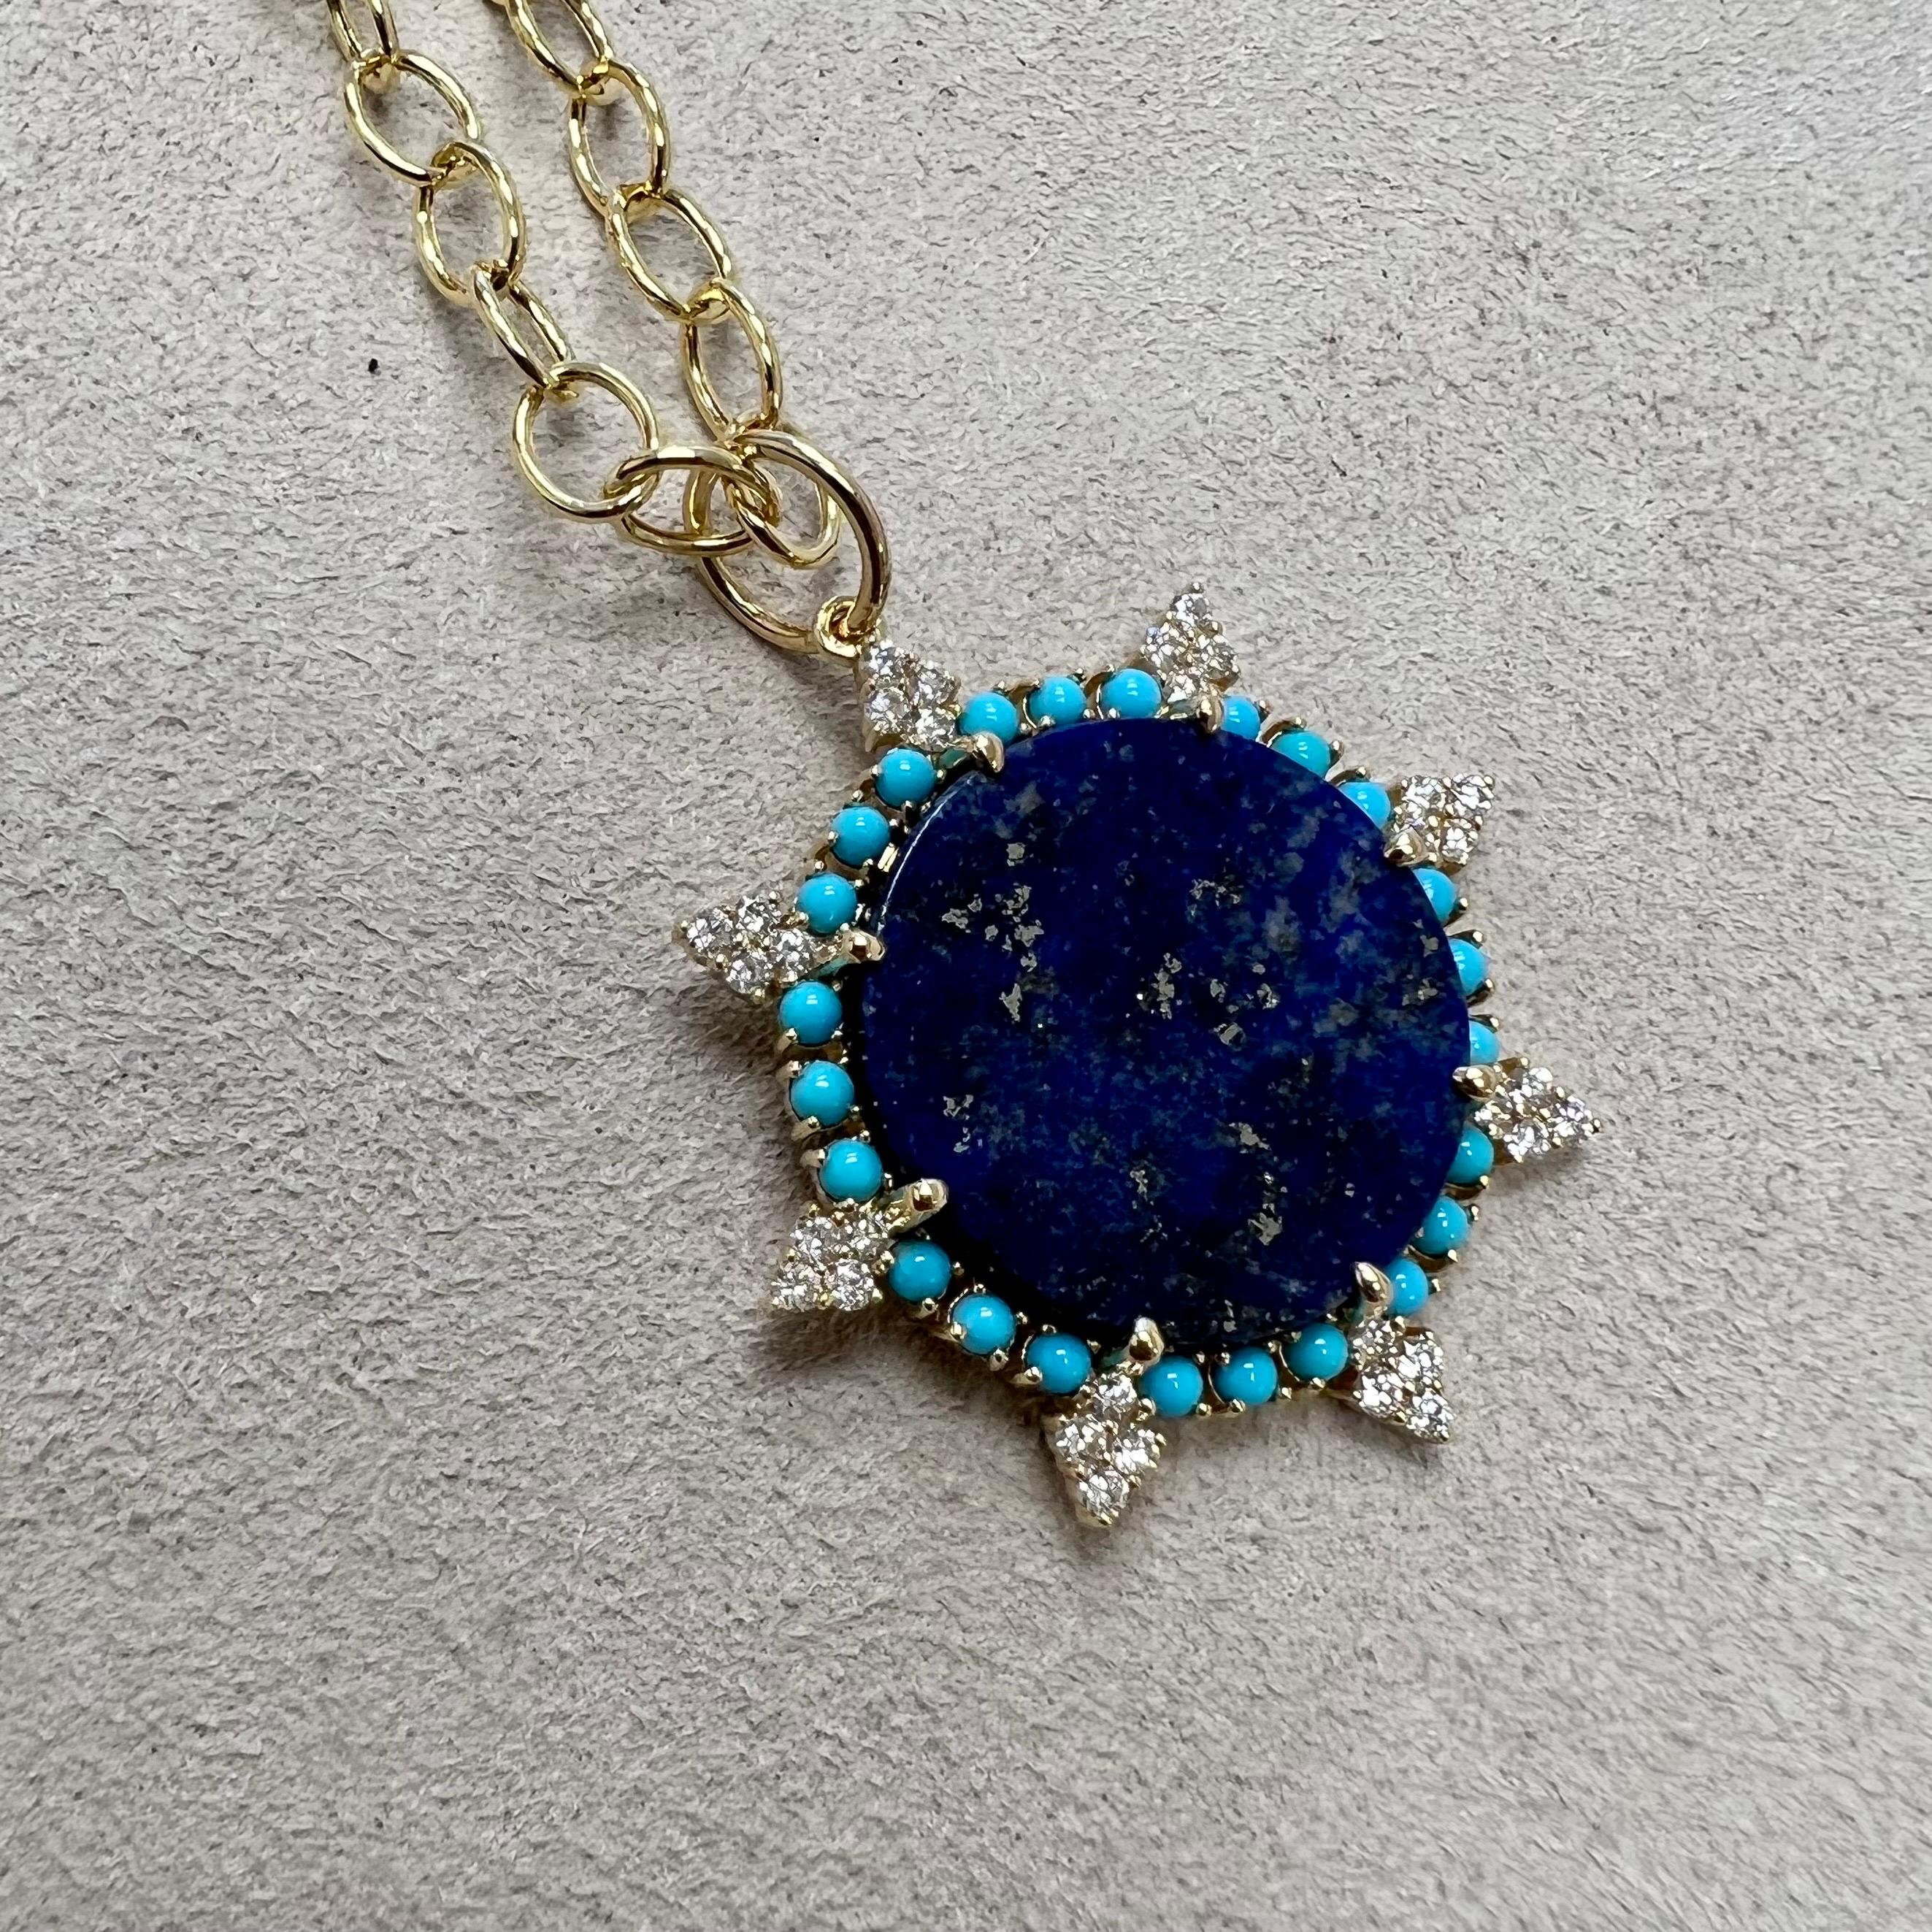 Created in 18 karat yellow gold
Lapis lazuli 9.50 carats approx.
Turquoise 1 carat approx.
Diamonds 0.50 carat approx.
Chain sold separately 
Limited edition

Handcrafted in rich 18-karat yellow gold, this exclusive edition pendant features a